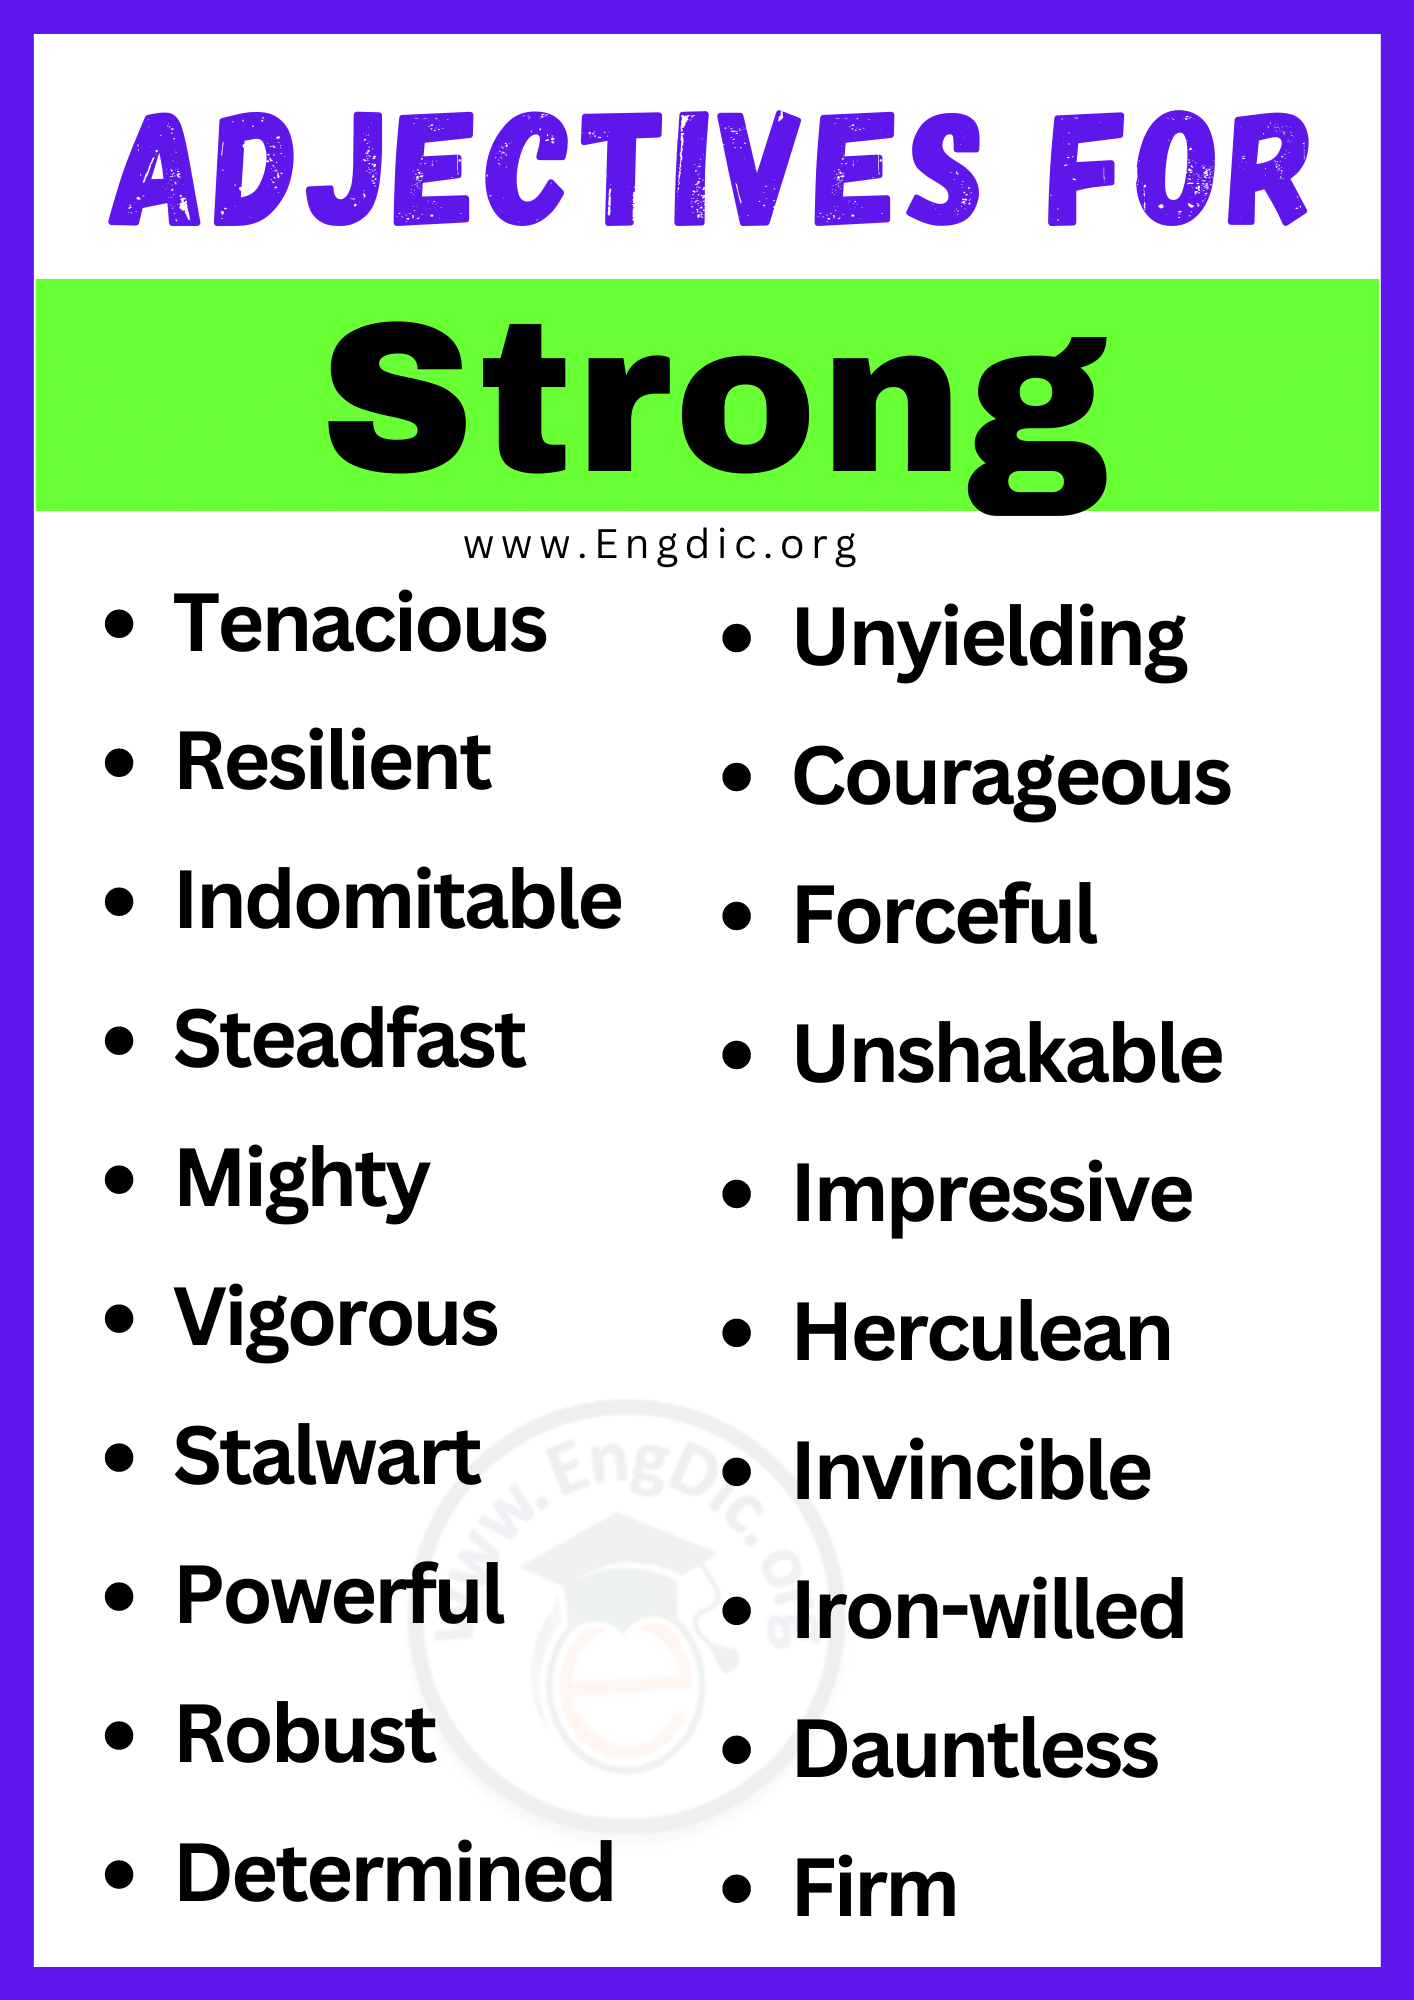 Adjectives for Strong